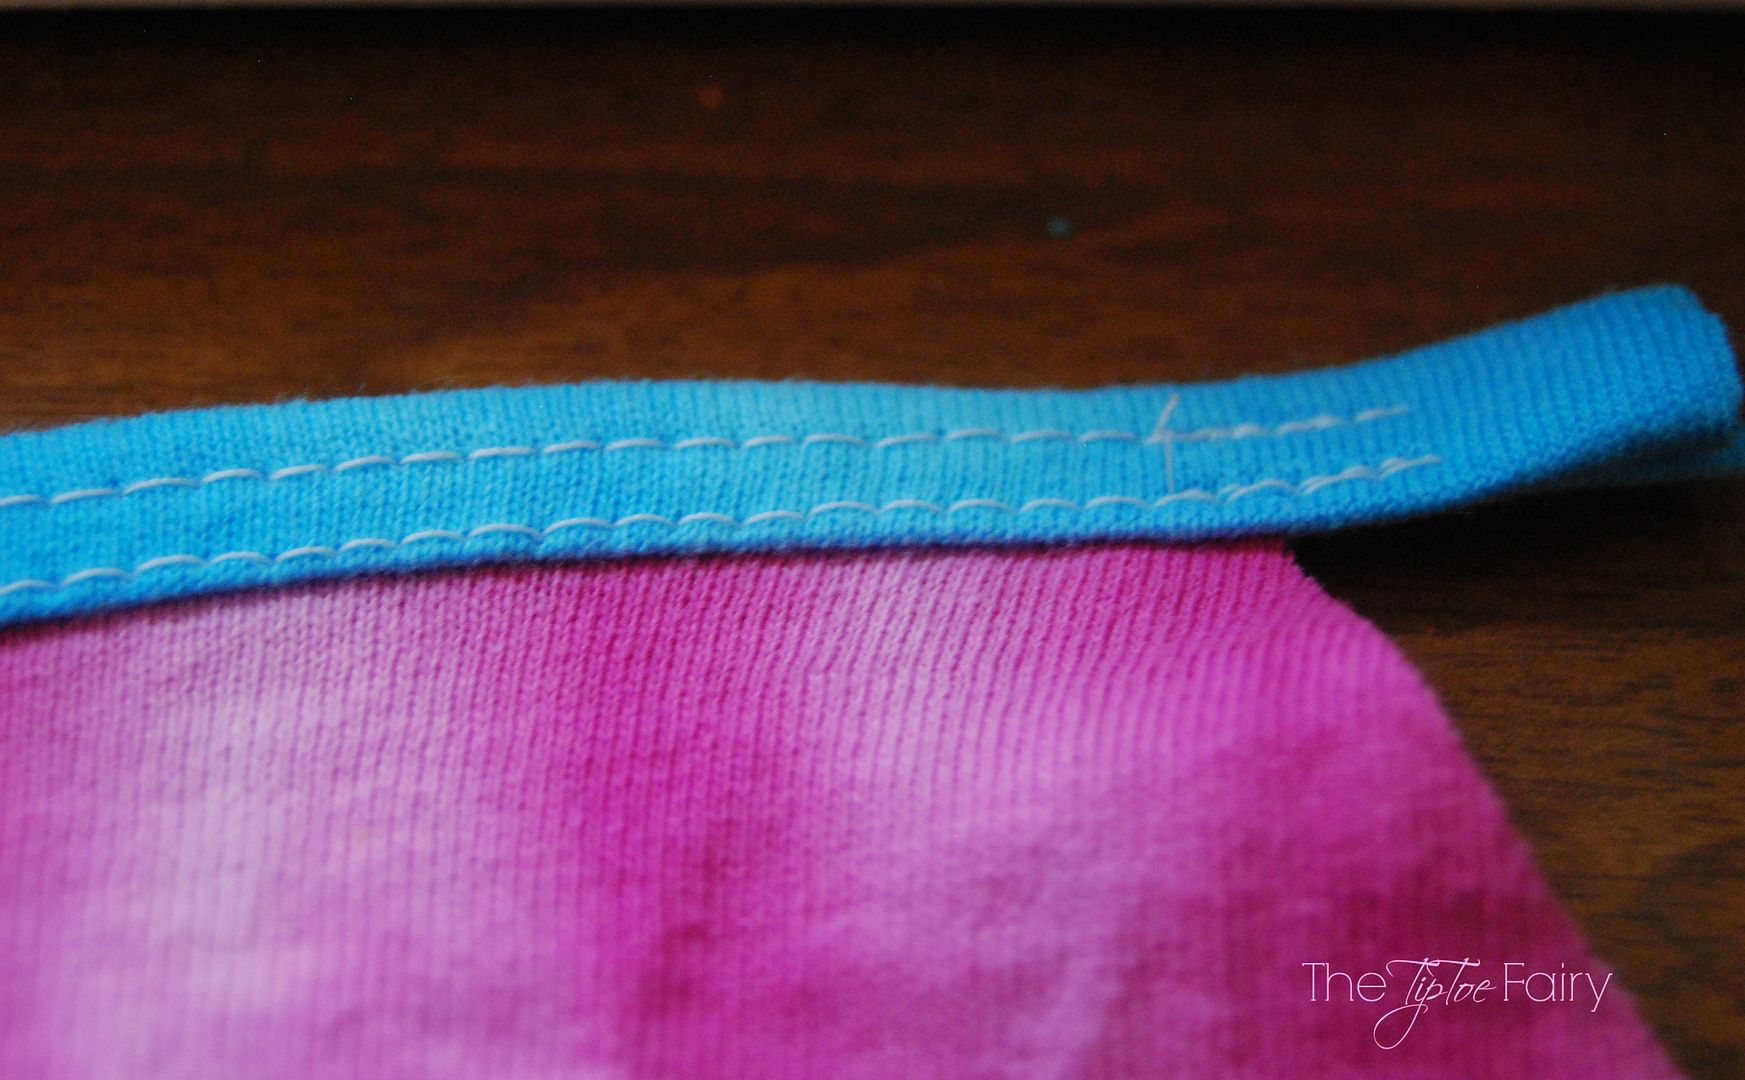 Sewing Tutorial for Knit Binding | The TipToe Fairy #sewingtutorial #tutorial #knitsewing #knitbinding